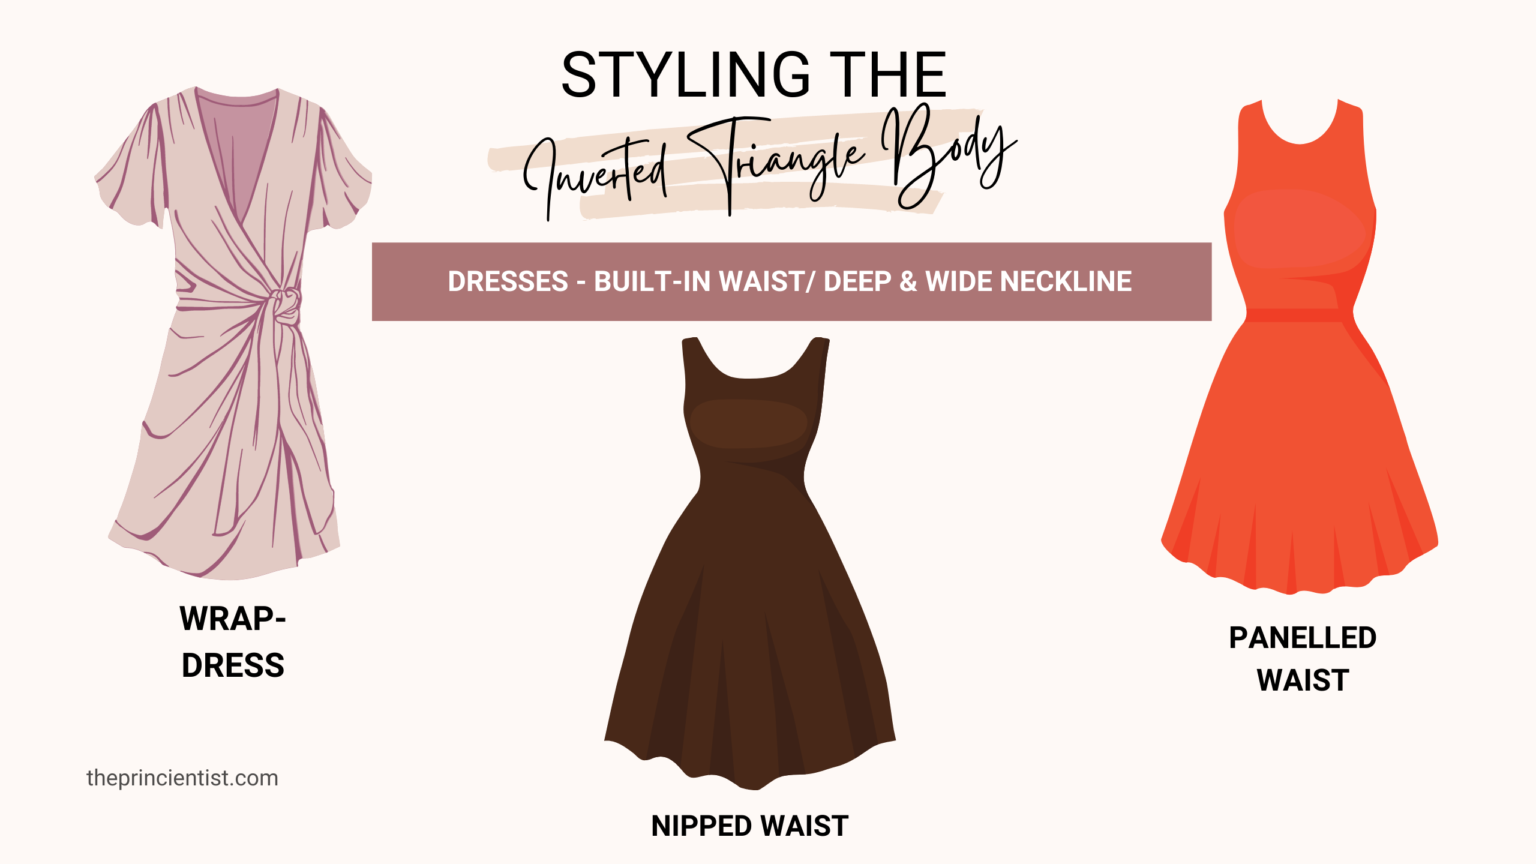 Dress your shape - Inverted Triangle